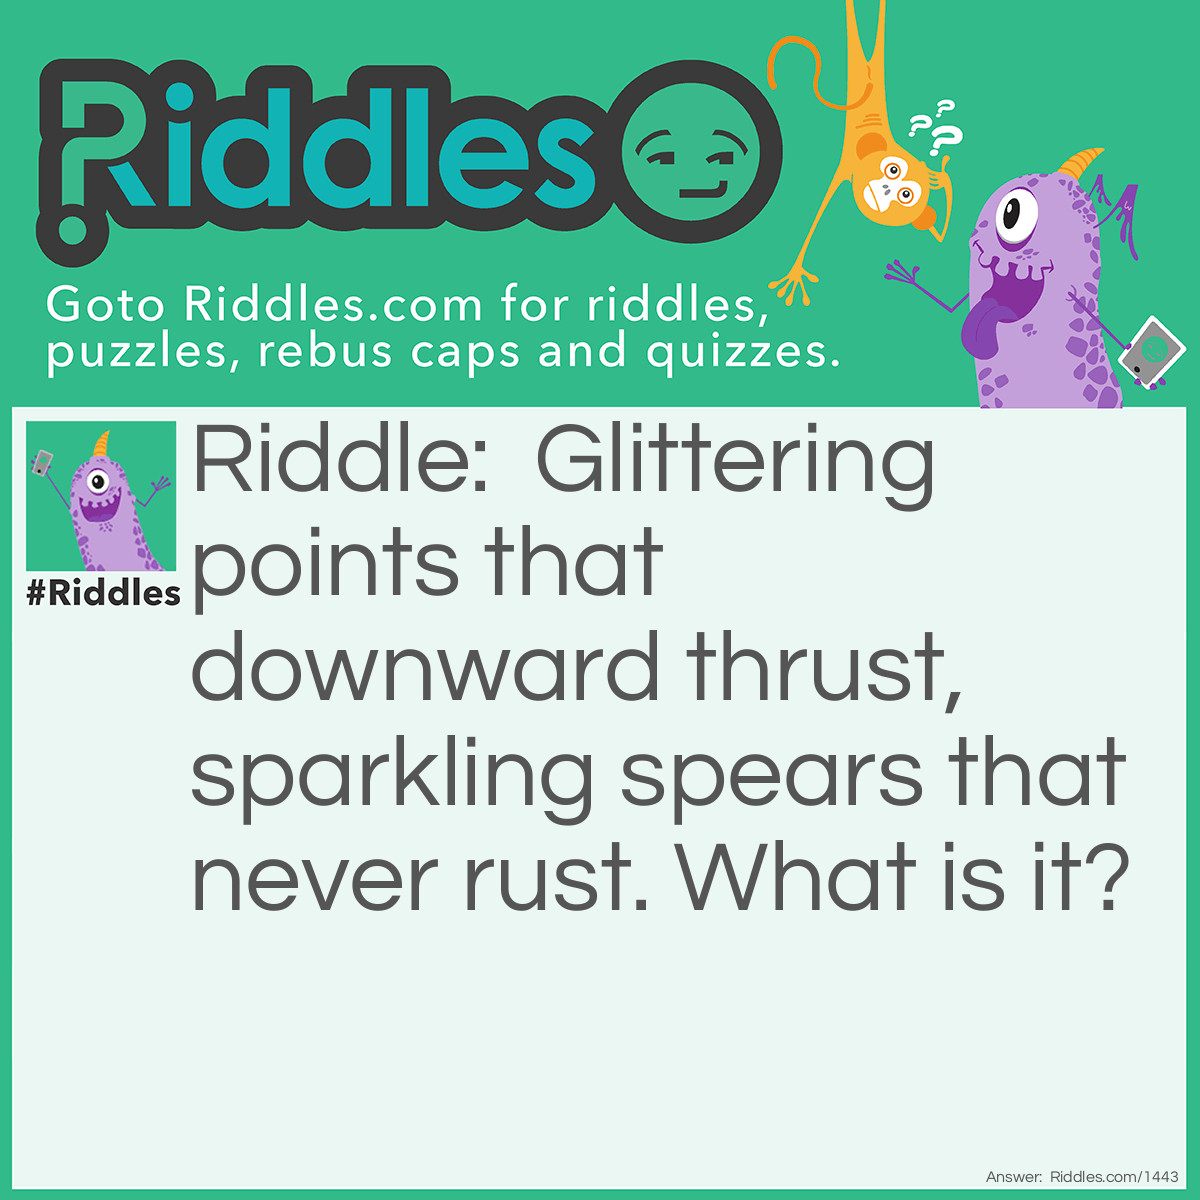 Riddle: Glittering points that downward thrust, Sparkling spears that never rust.
What is it? Answer: An Icicle.